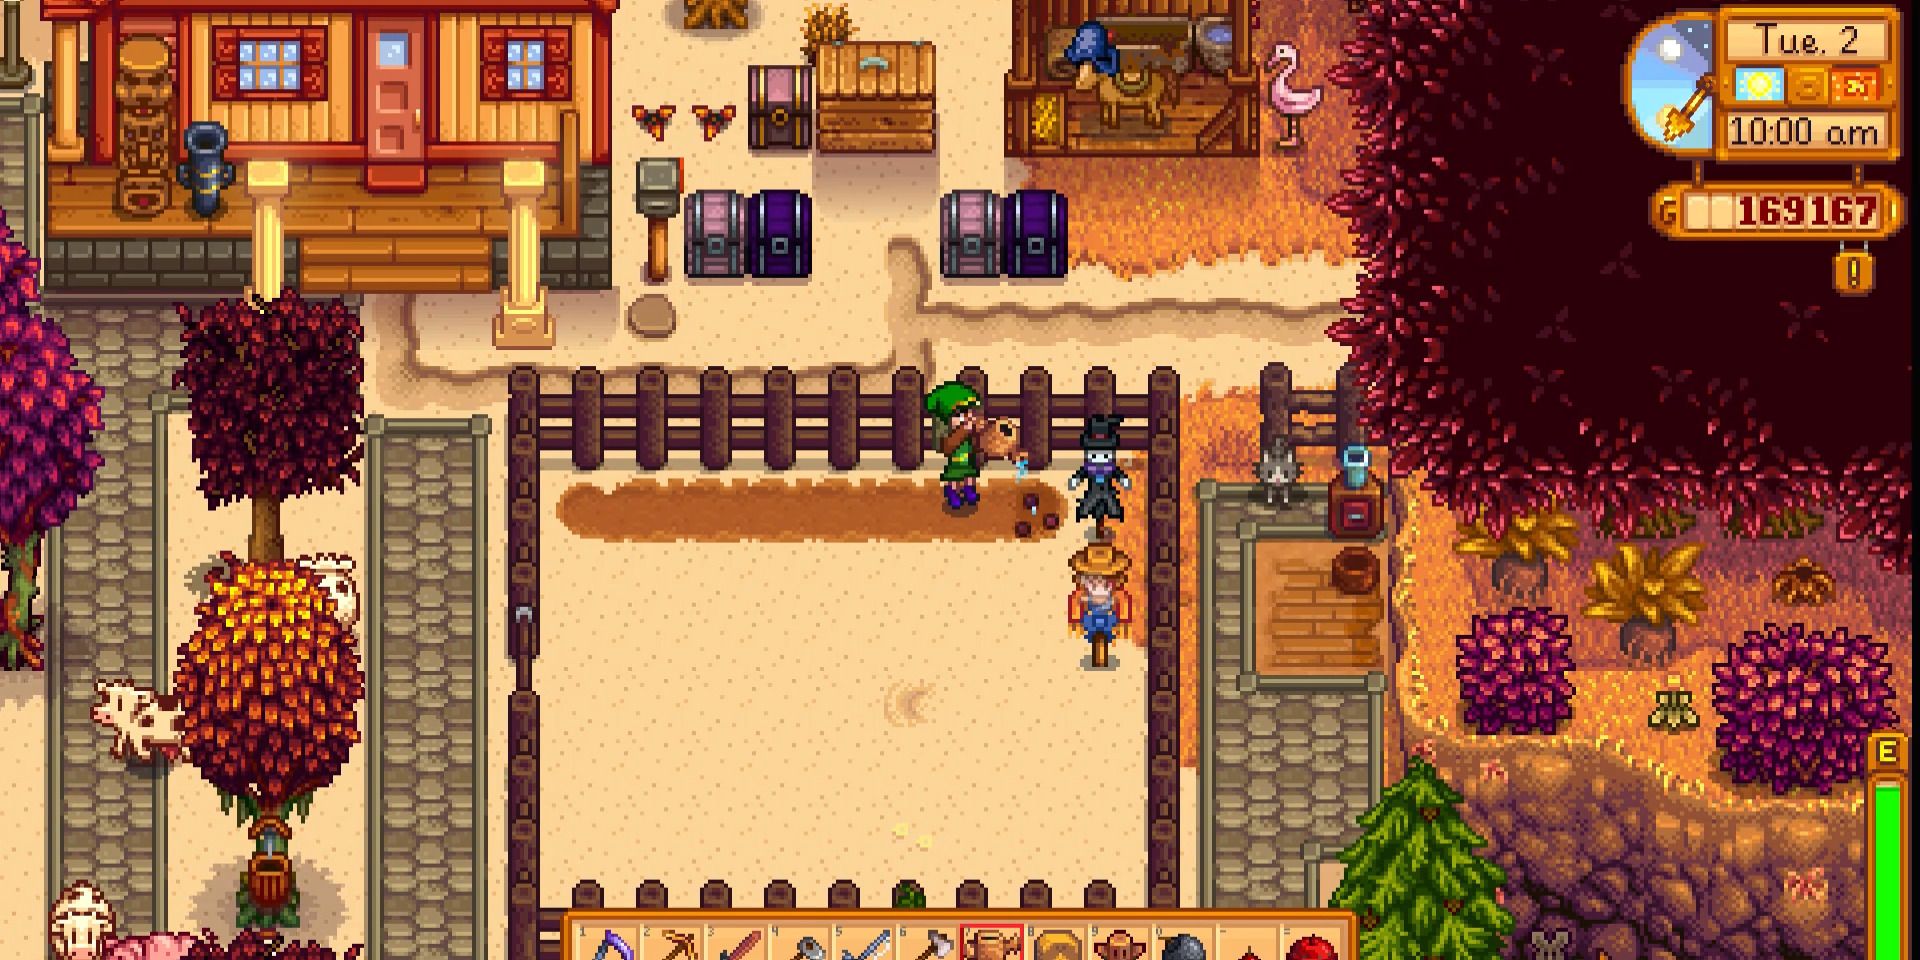 Image of a character watering Broccoli Seeds in Stardew Valley